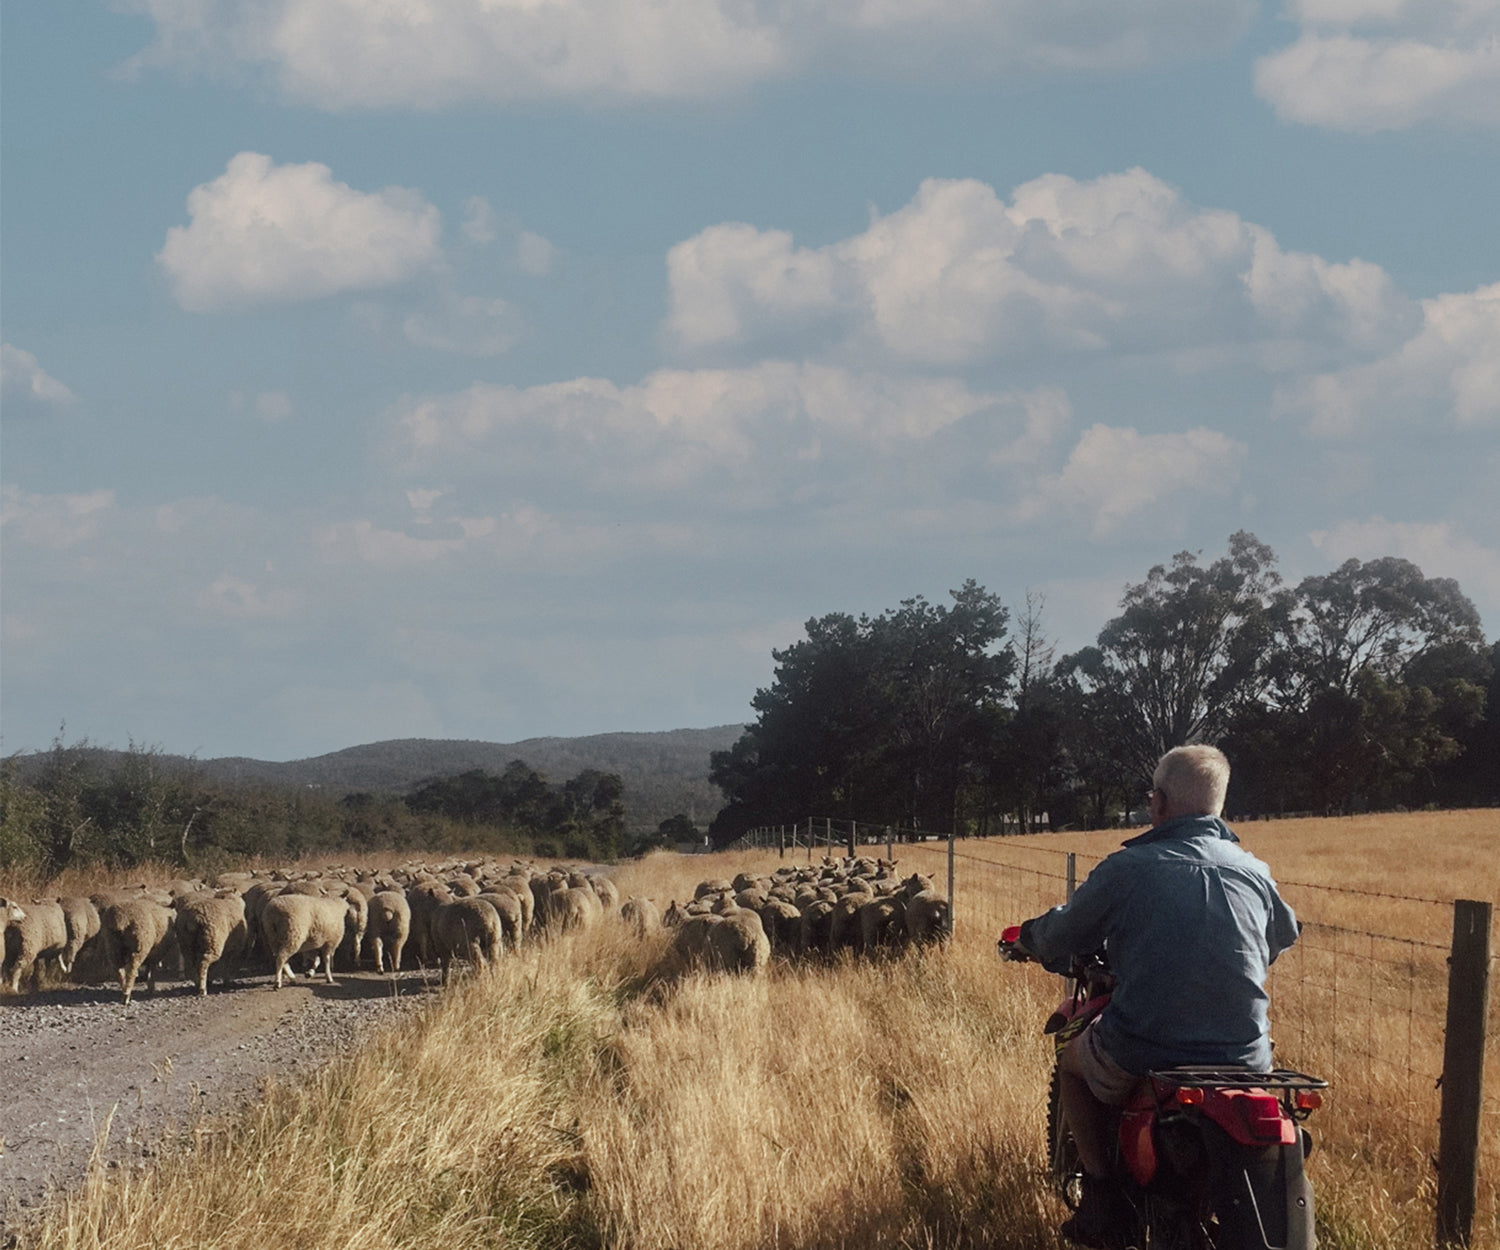 One of the Cooper's on a moped, herding sheep.